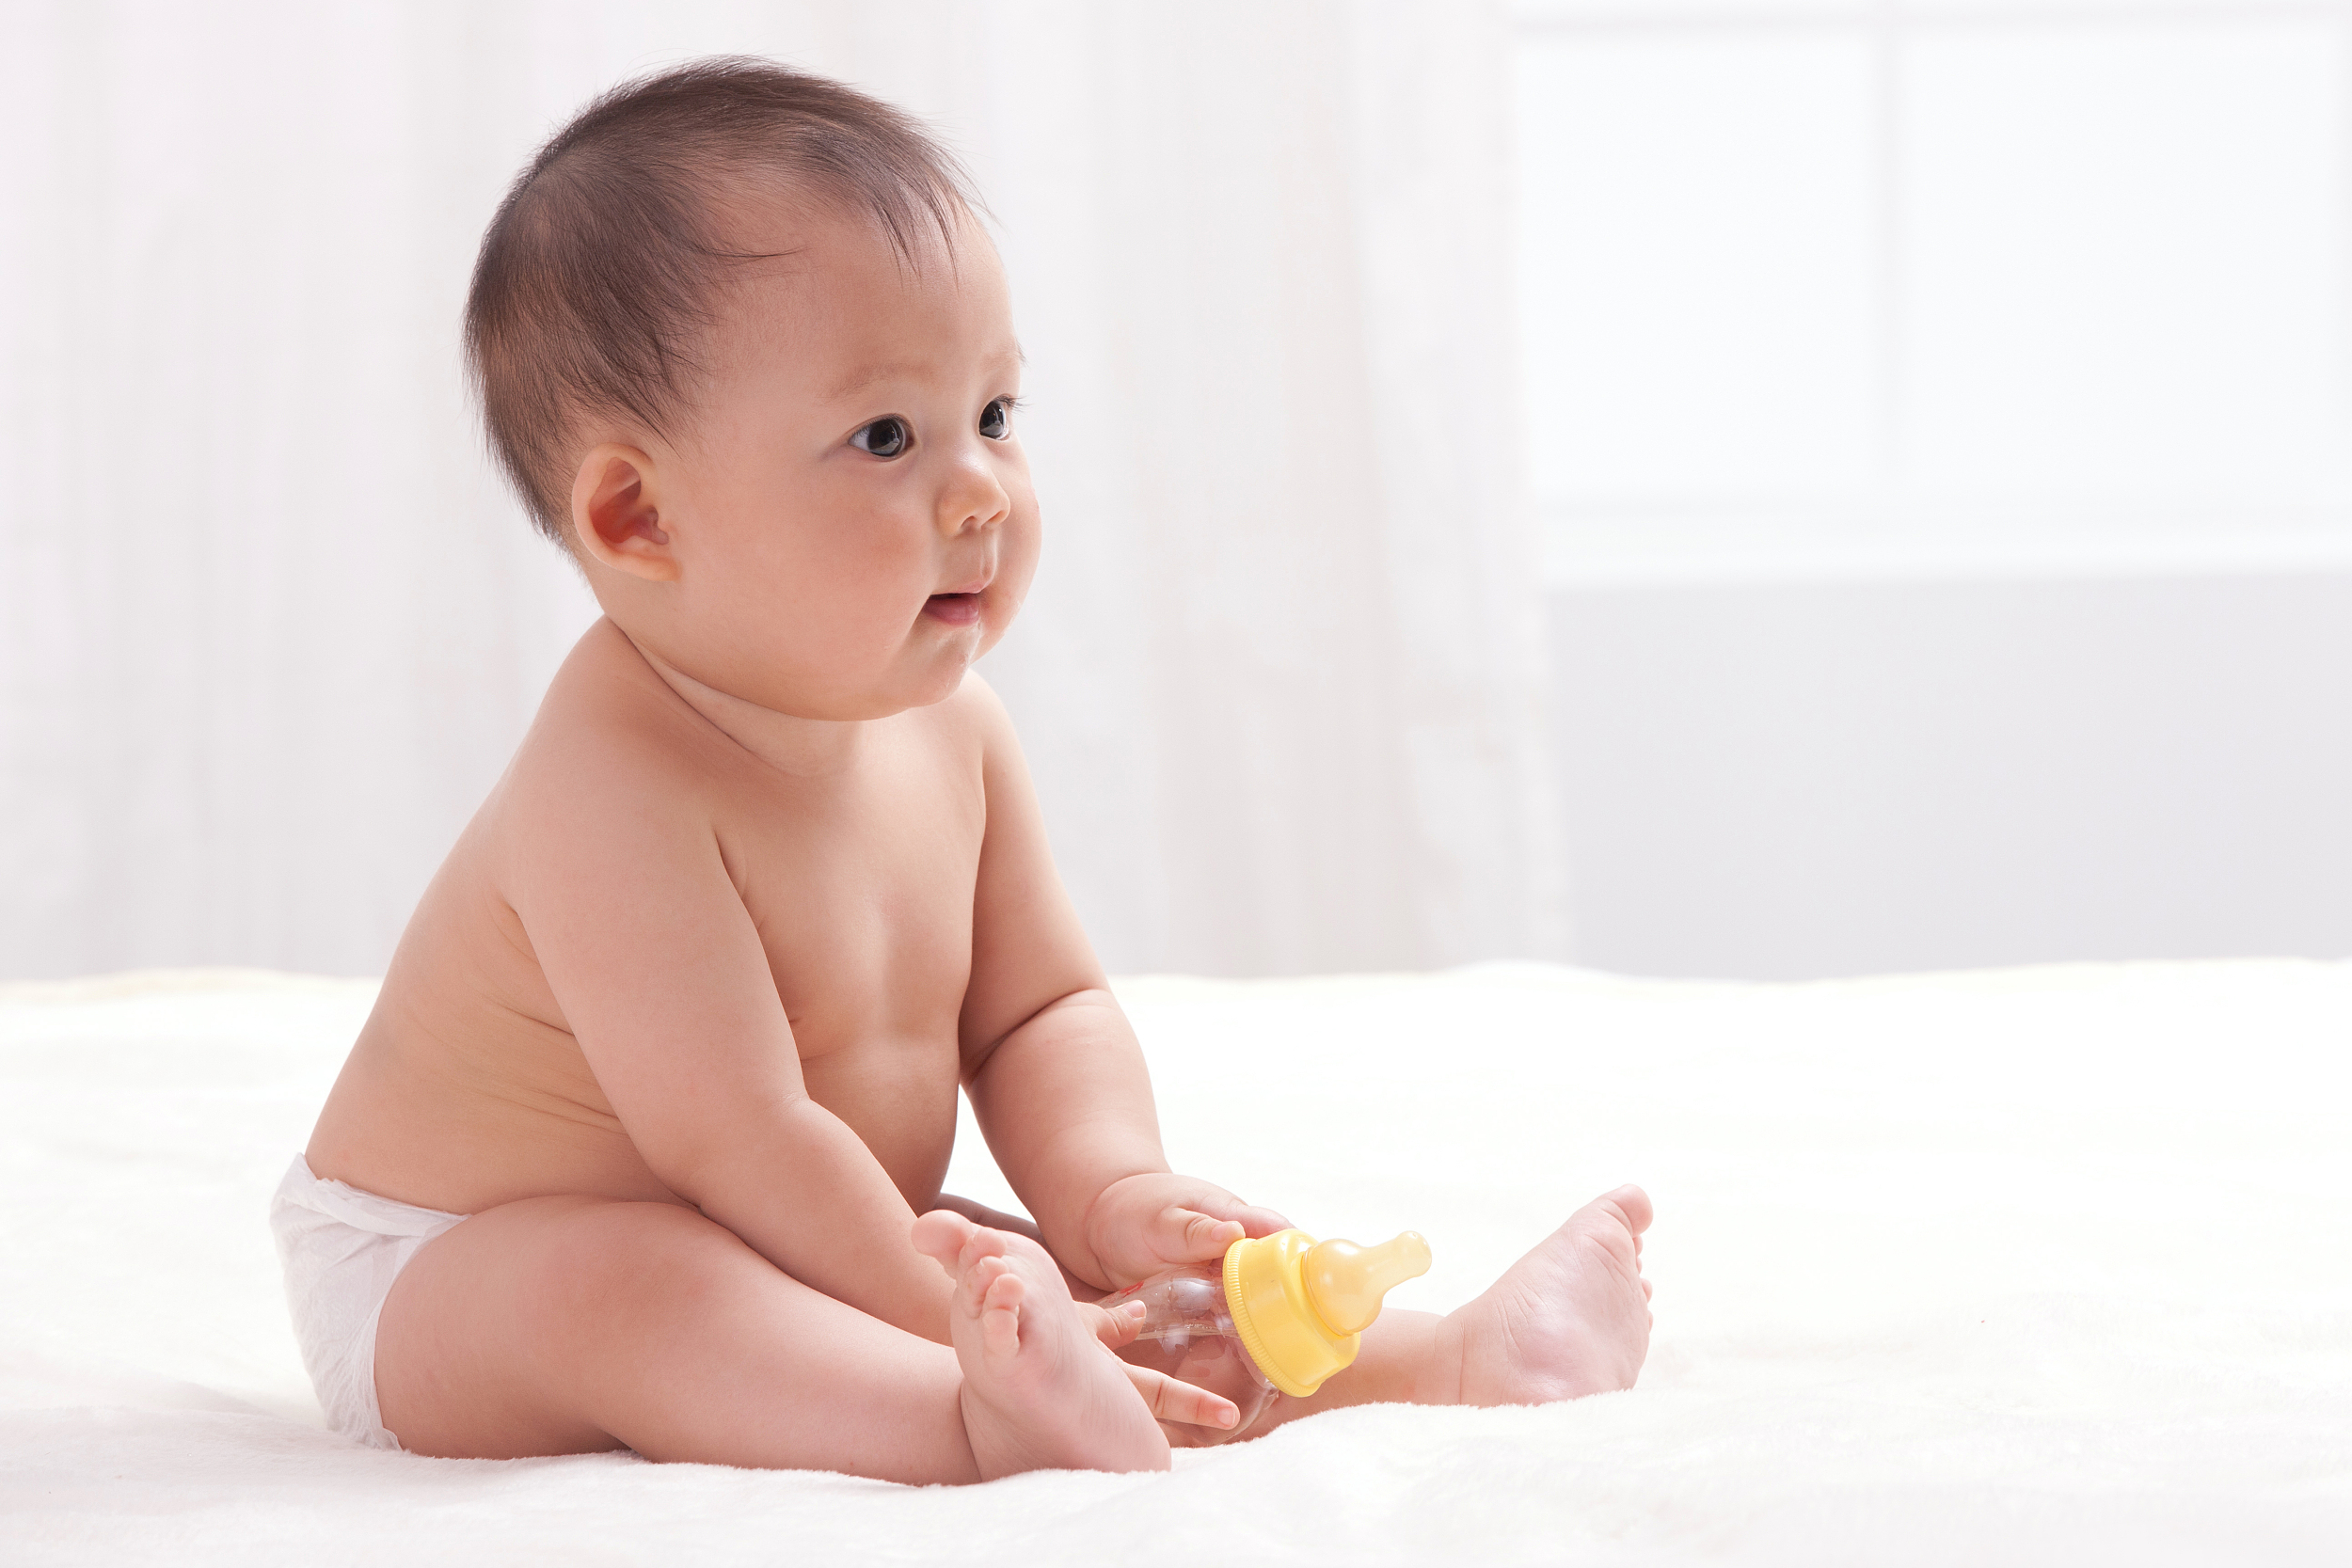 Are you using the right diaper size?